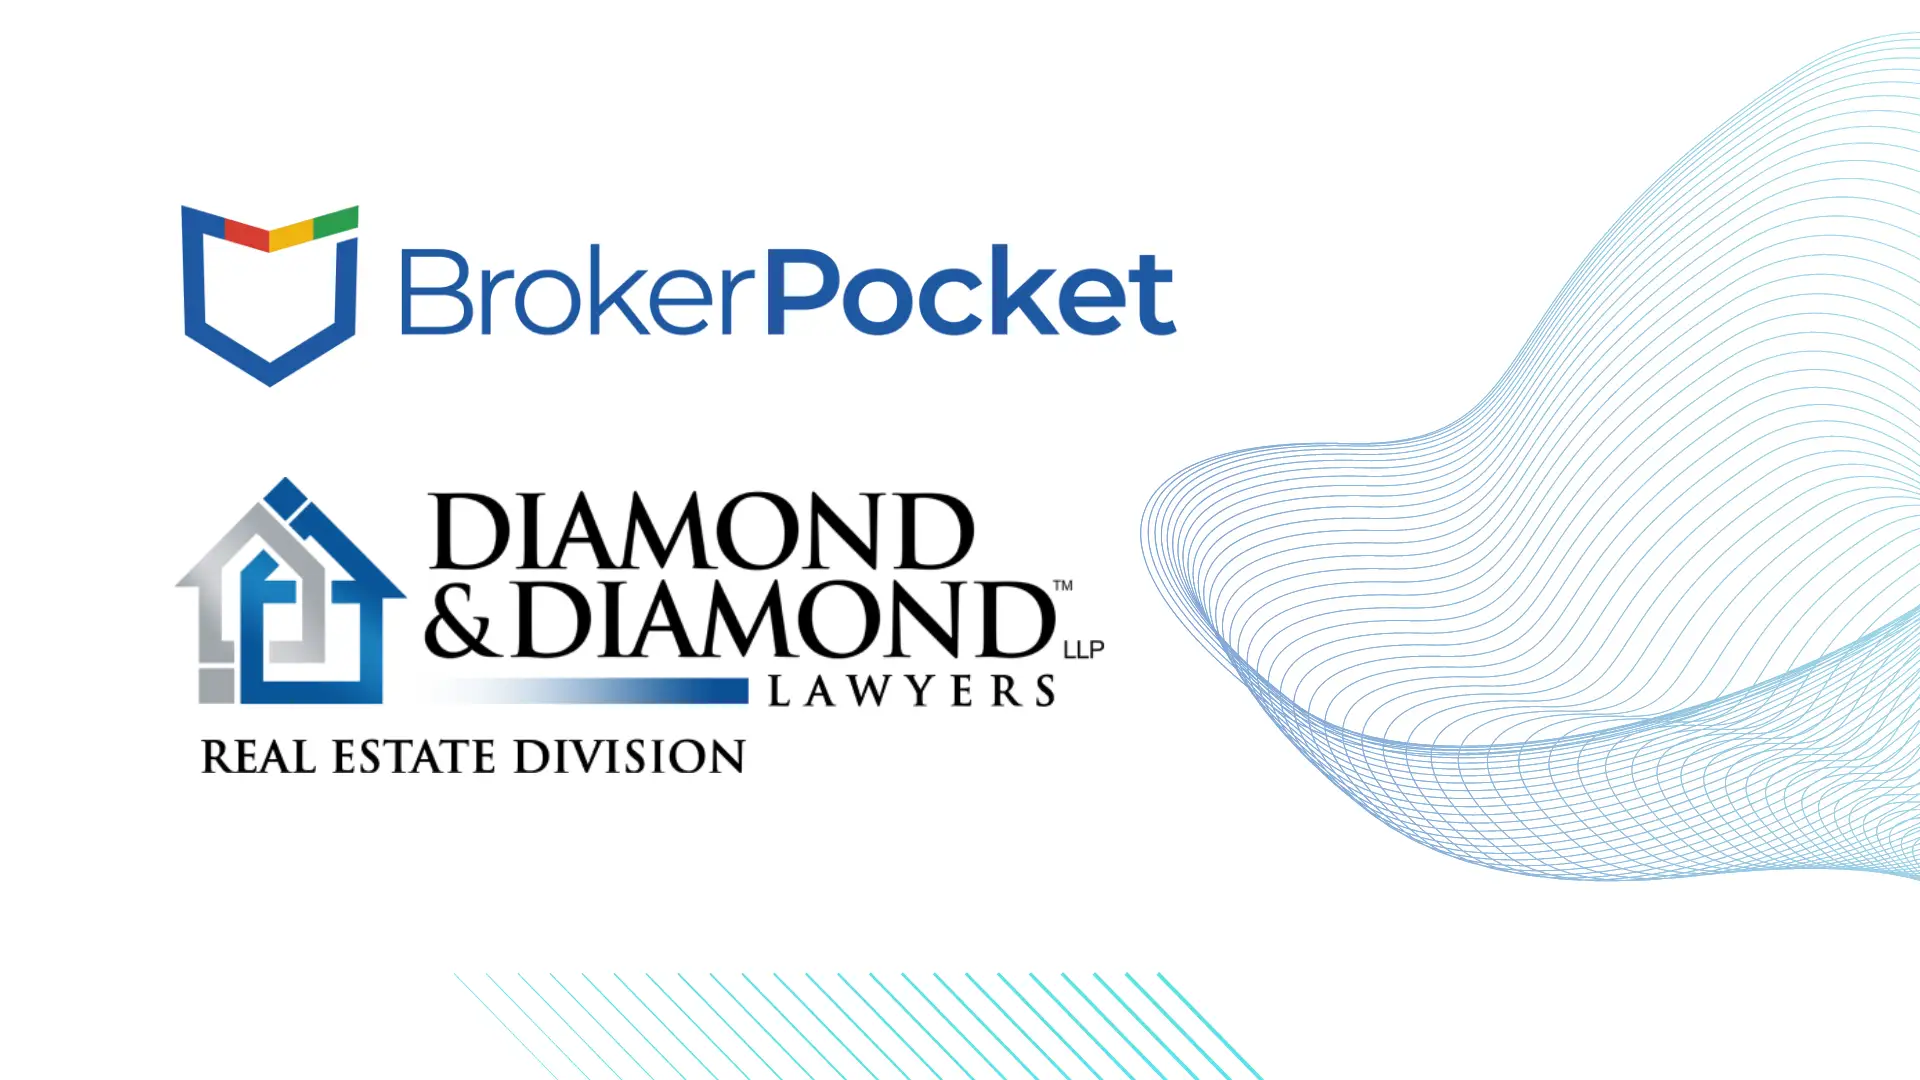 BrokerPocket Announces Free Legal Chat Support for Real Estate Professionals